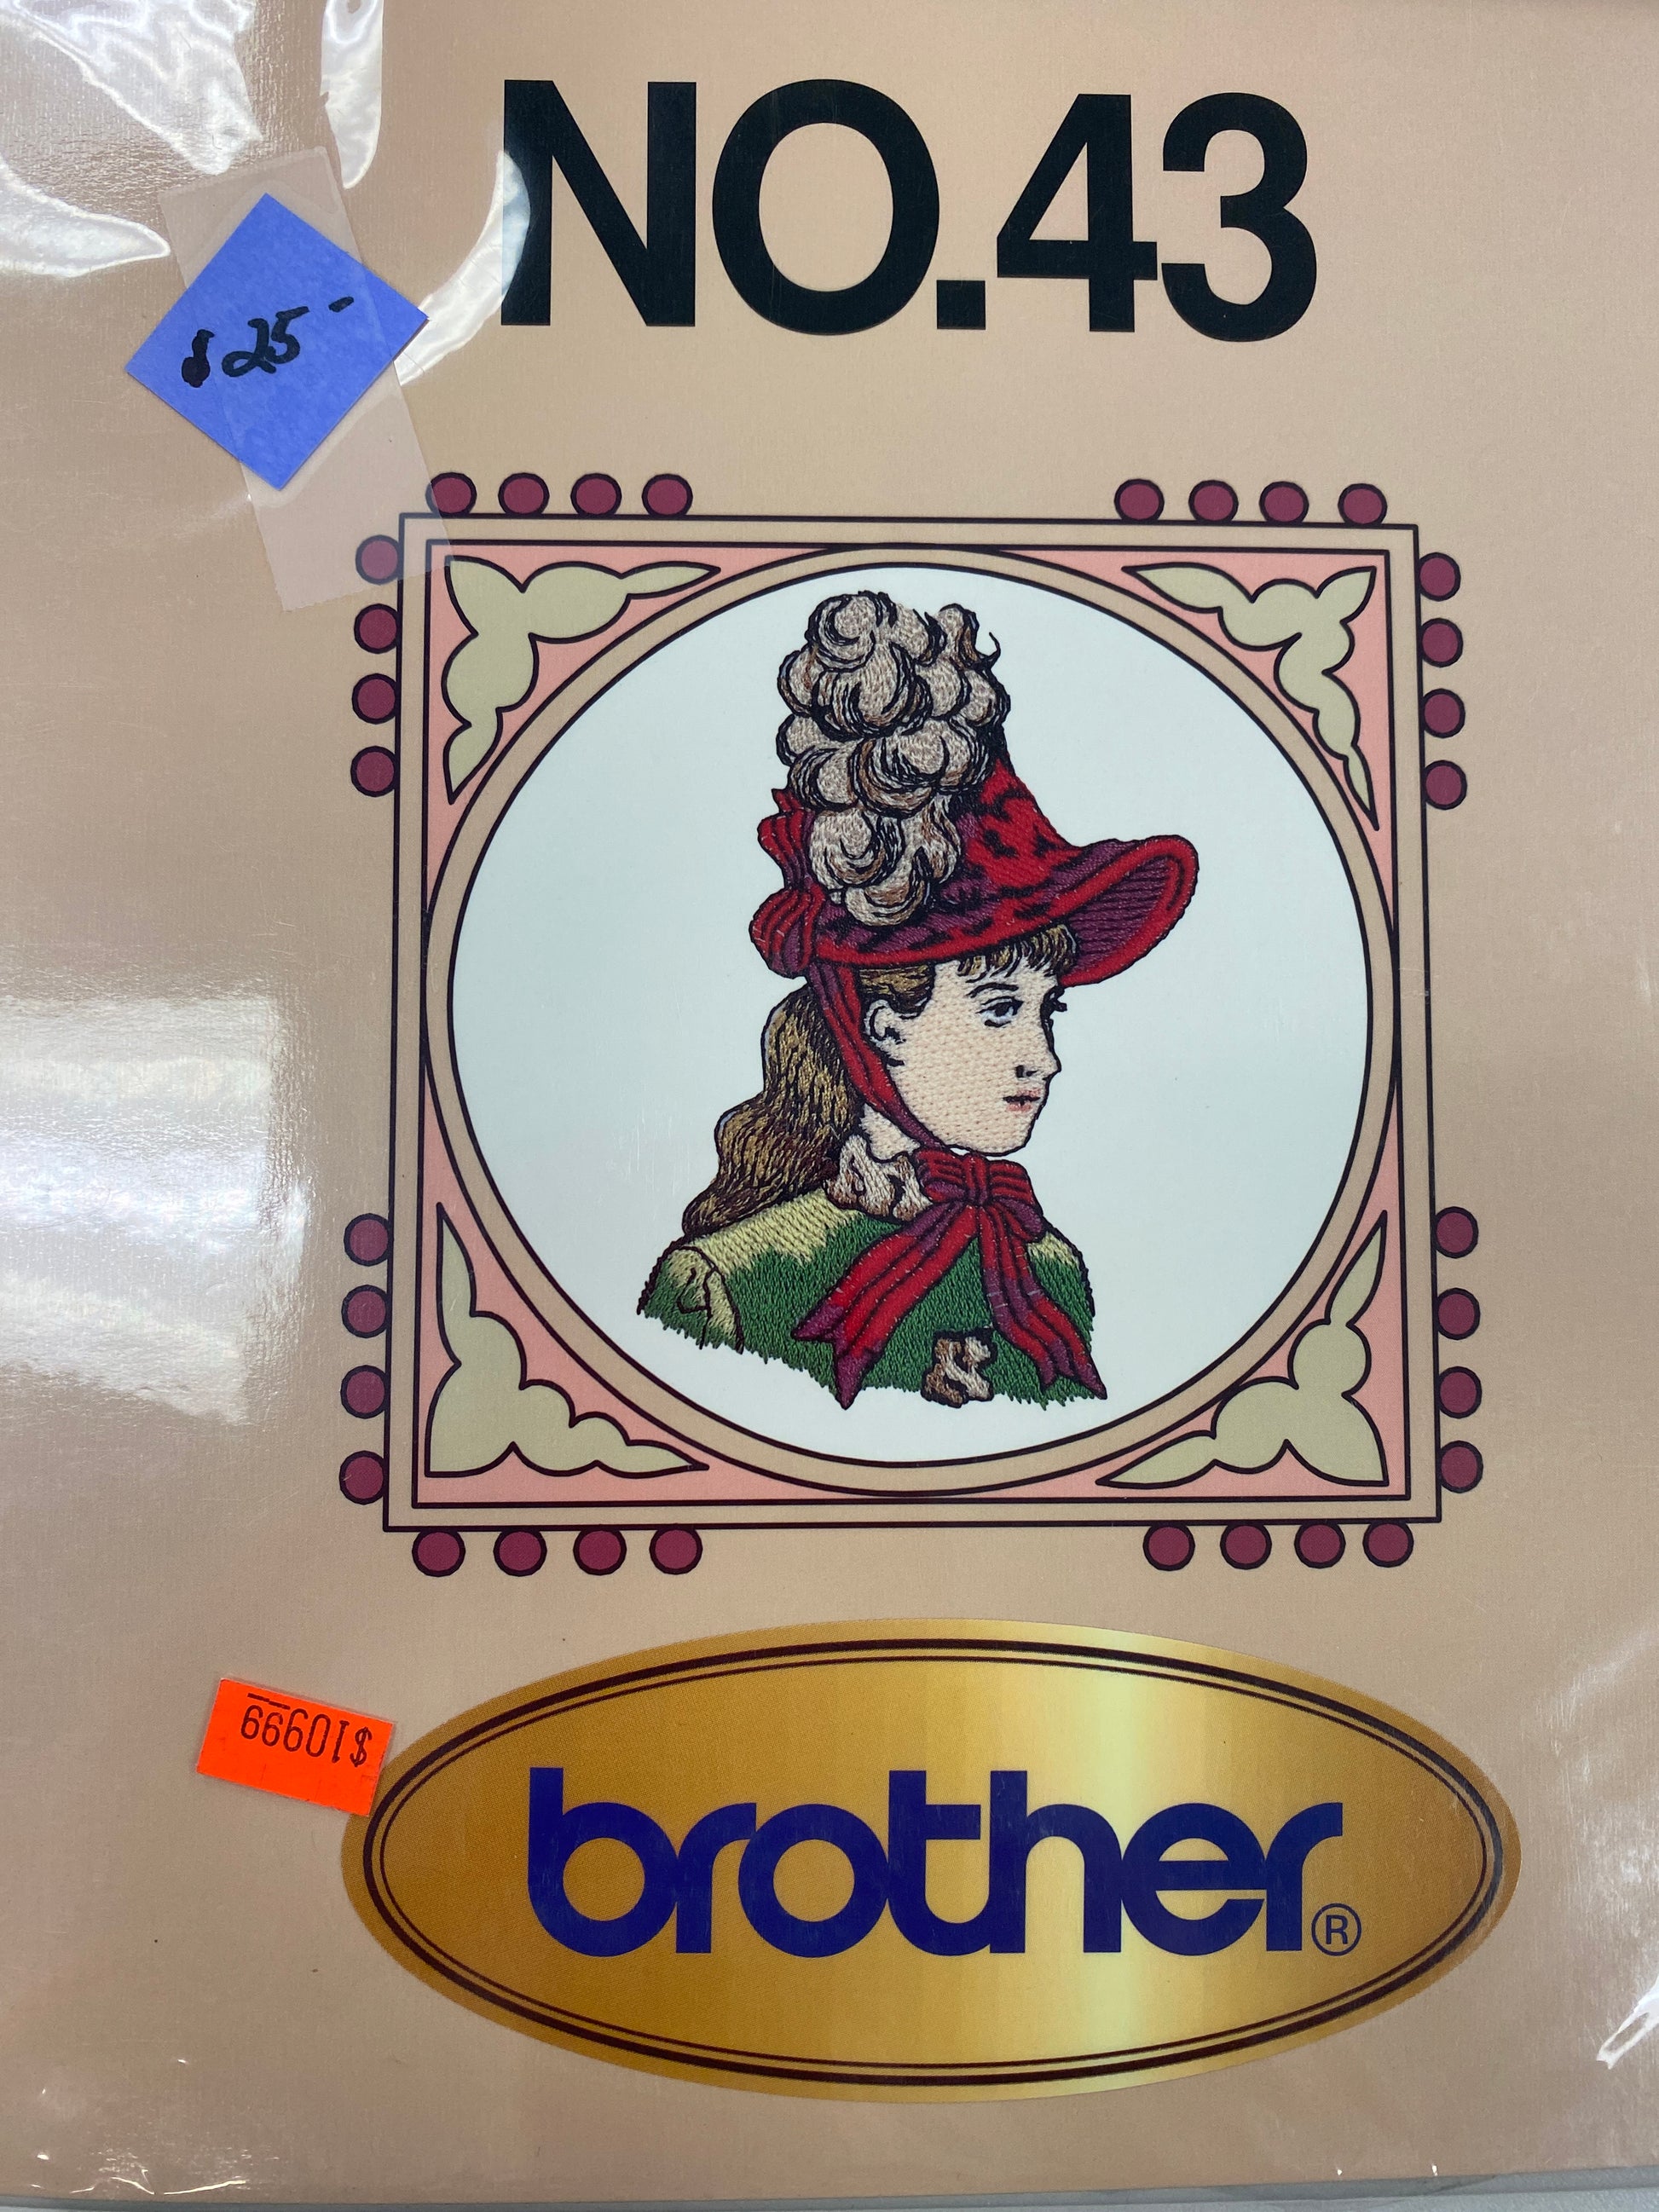 Brother Embroidery Card NO. 71 - Moonee Ponds Sewing